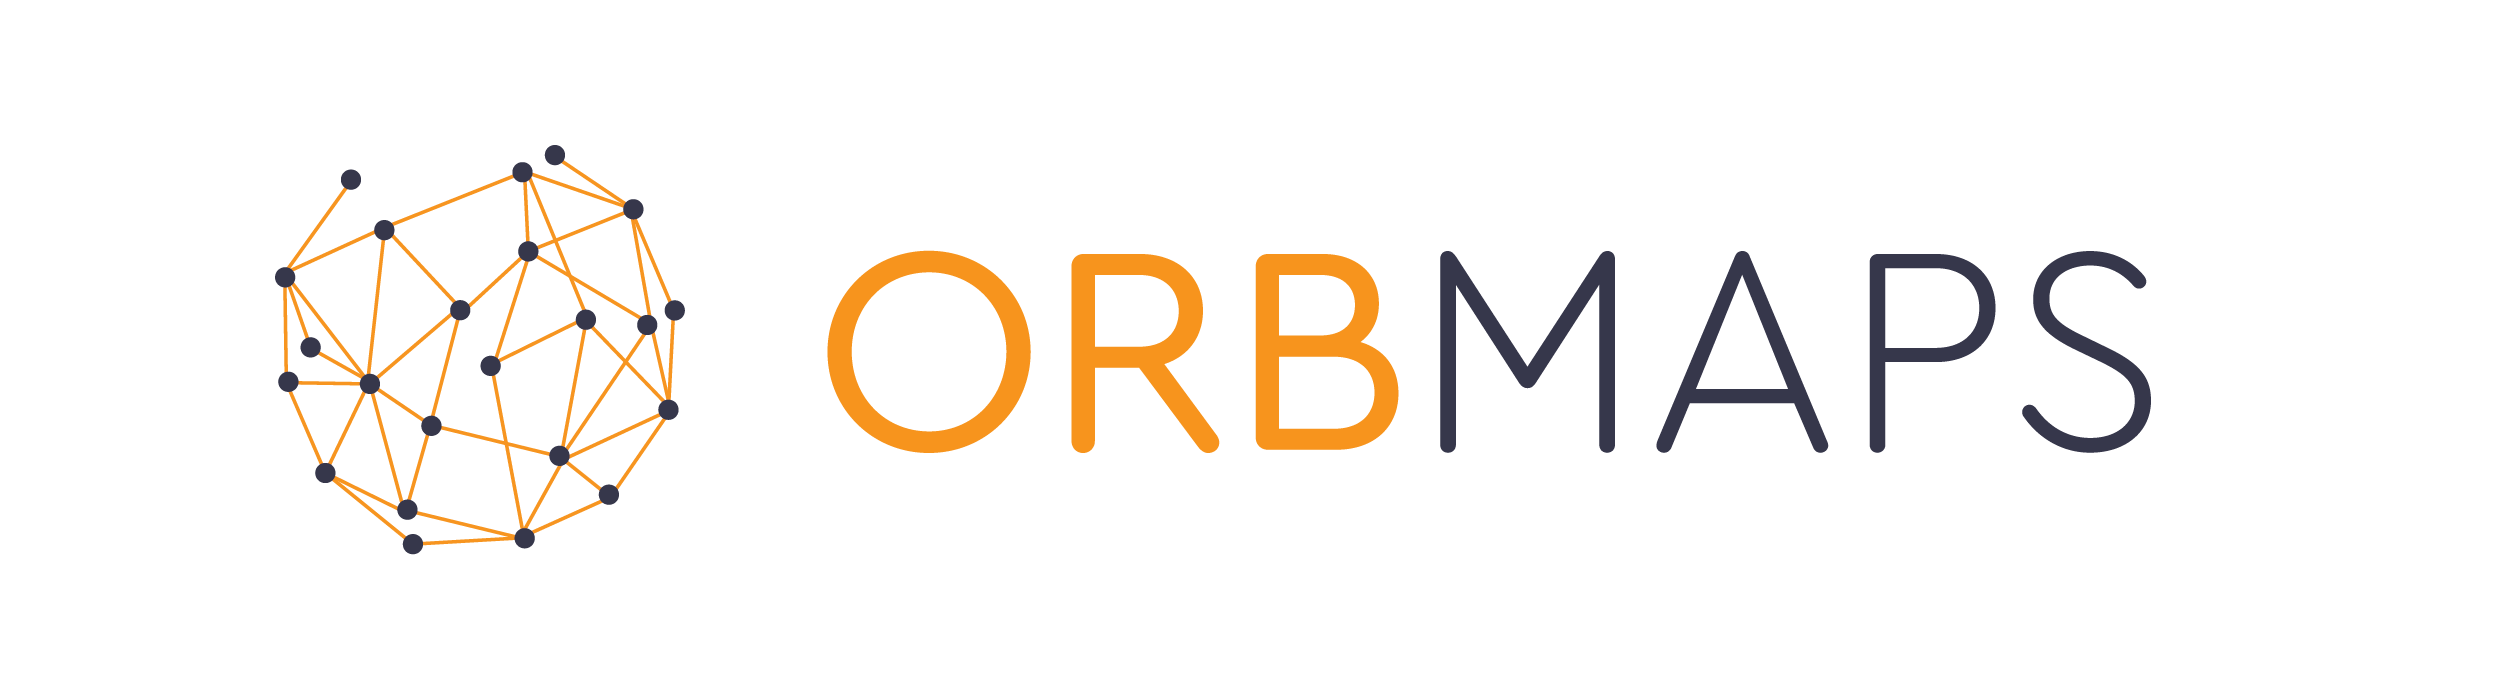 OrbMaps